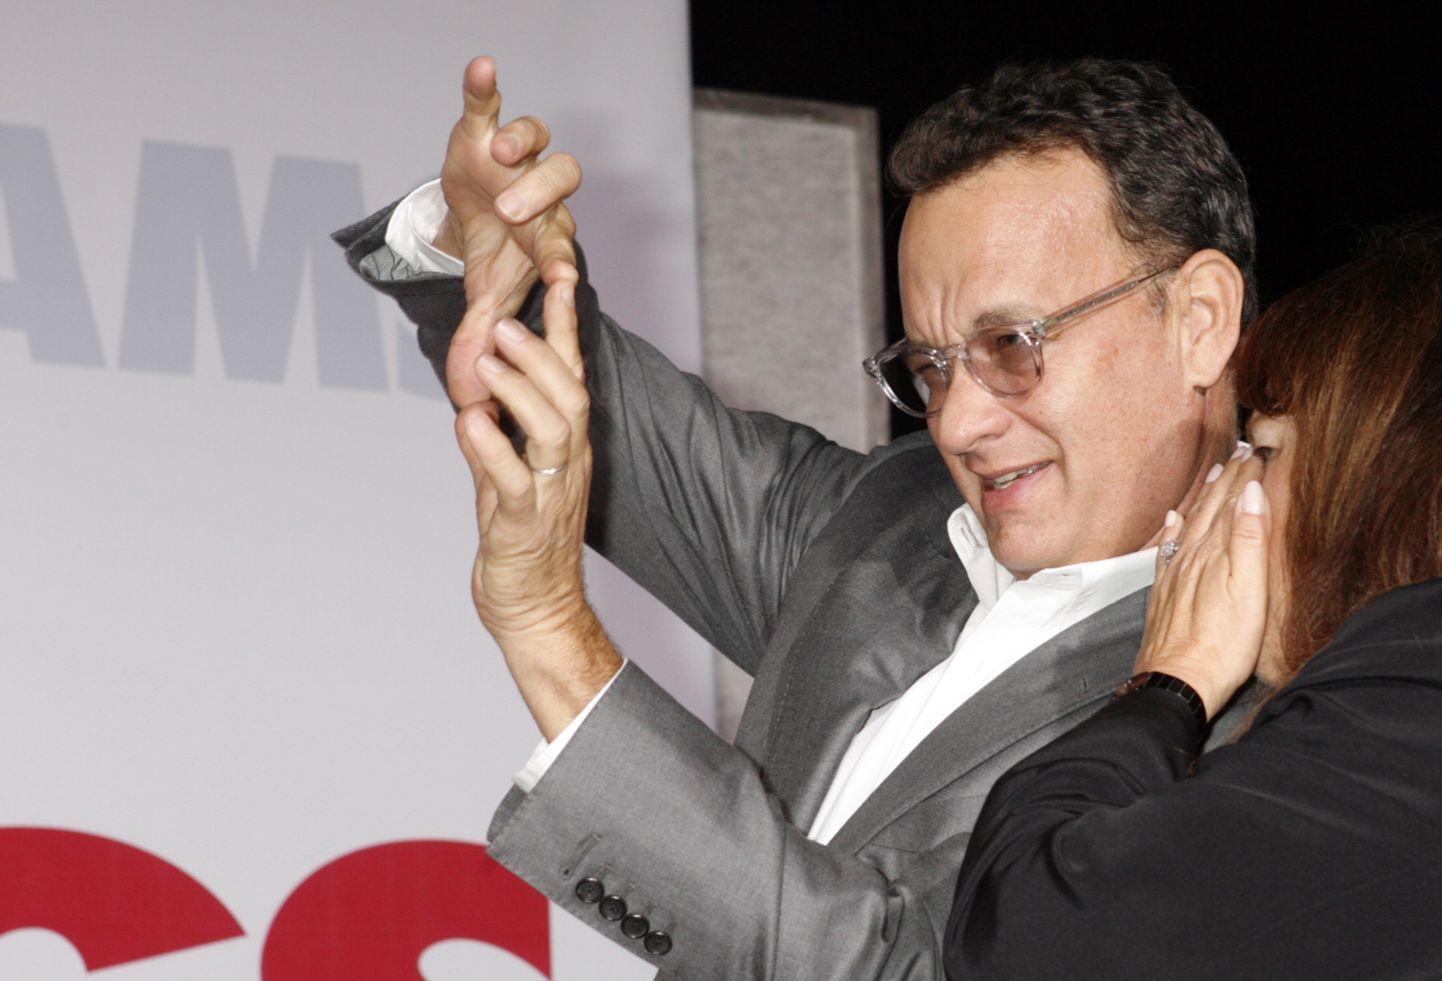 Actor Tom Hanks uses his fingers as a "view finder" as he watches his wife Rita Wilson pose at the premiere of her new film "Old Dogs" in Hollywood, California November 9, 2009. Rita Wilson's publicist Heidi Schaeffer is shown (R.)  REUTERS/Fred Prouser    (UNITED STATES ENTERTAINMENT)